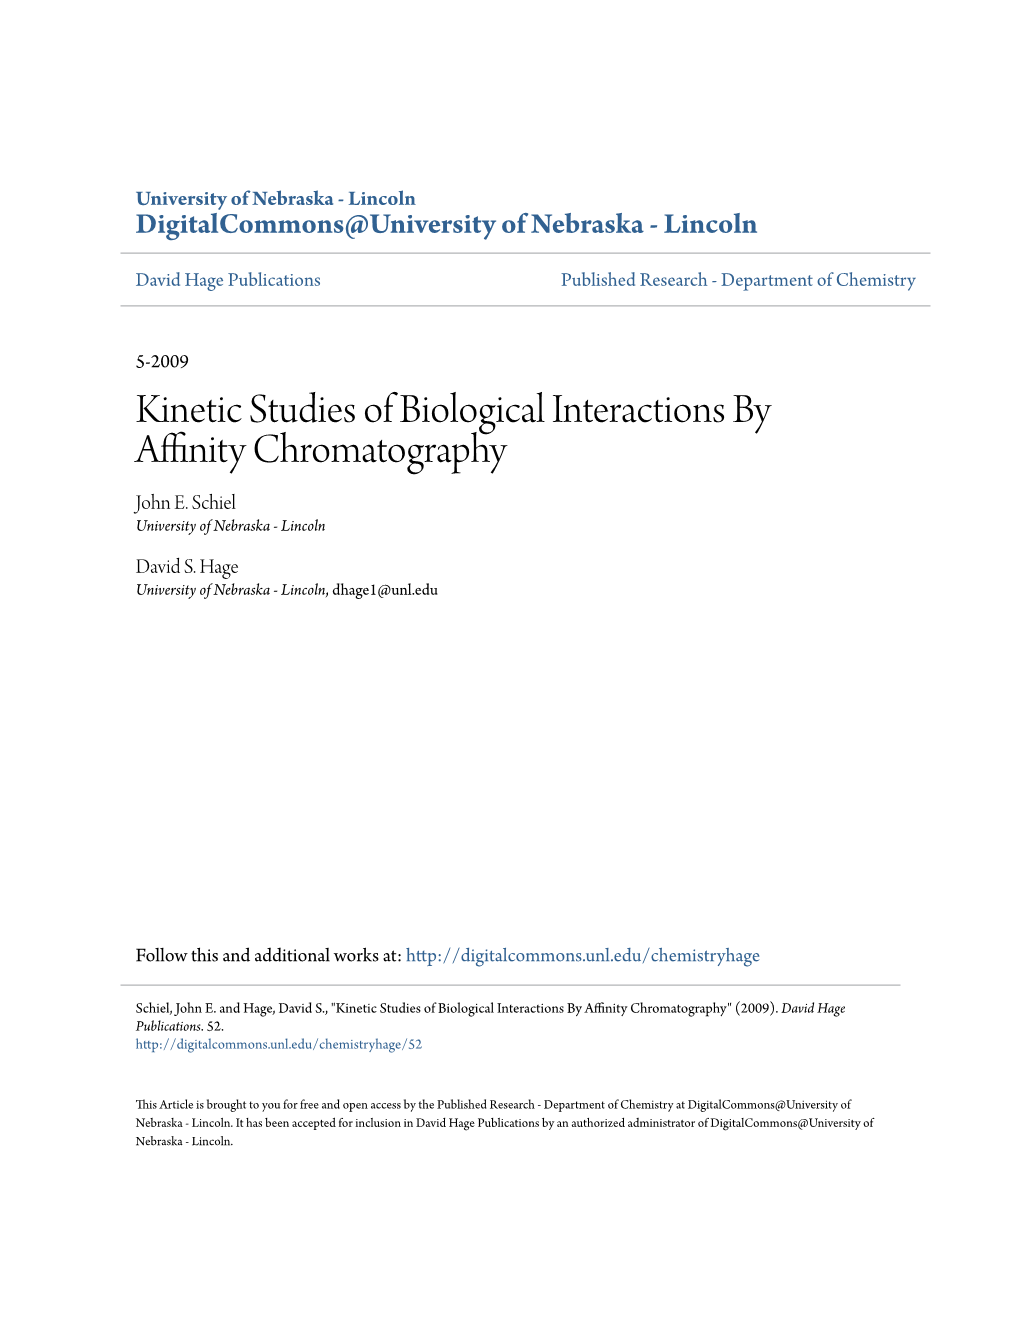 Kinetic Studies of Biological Interactions by Affinity Chromatography John E